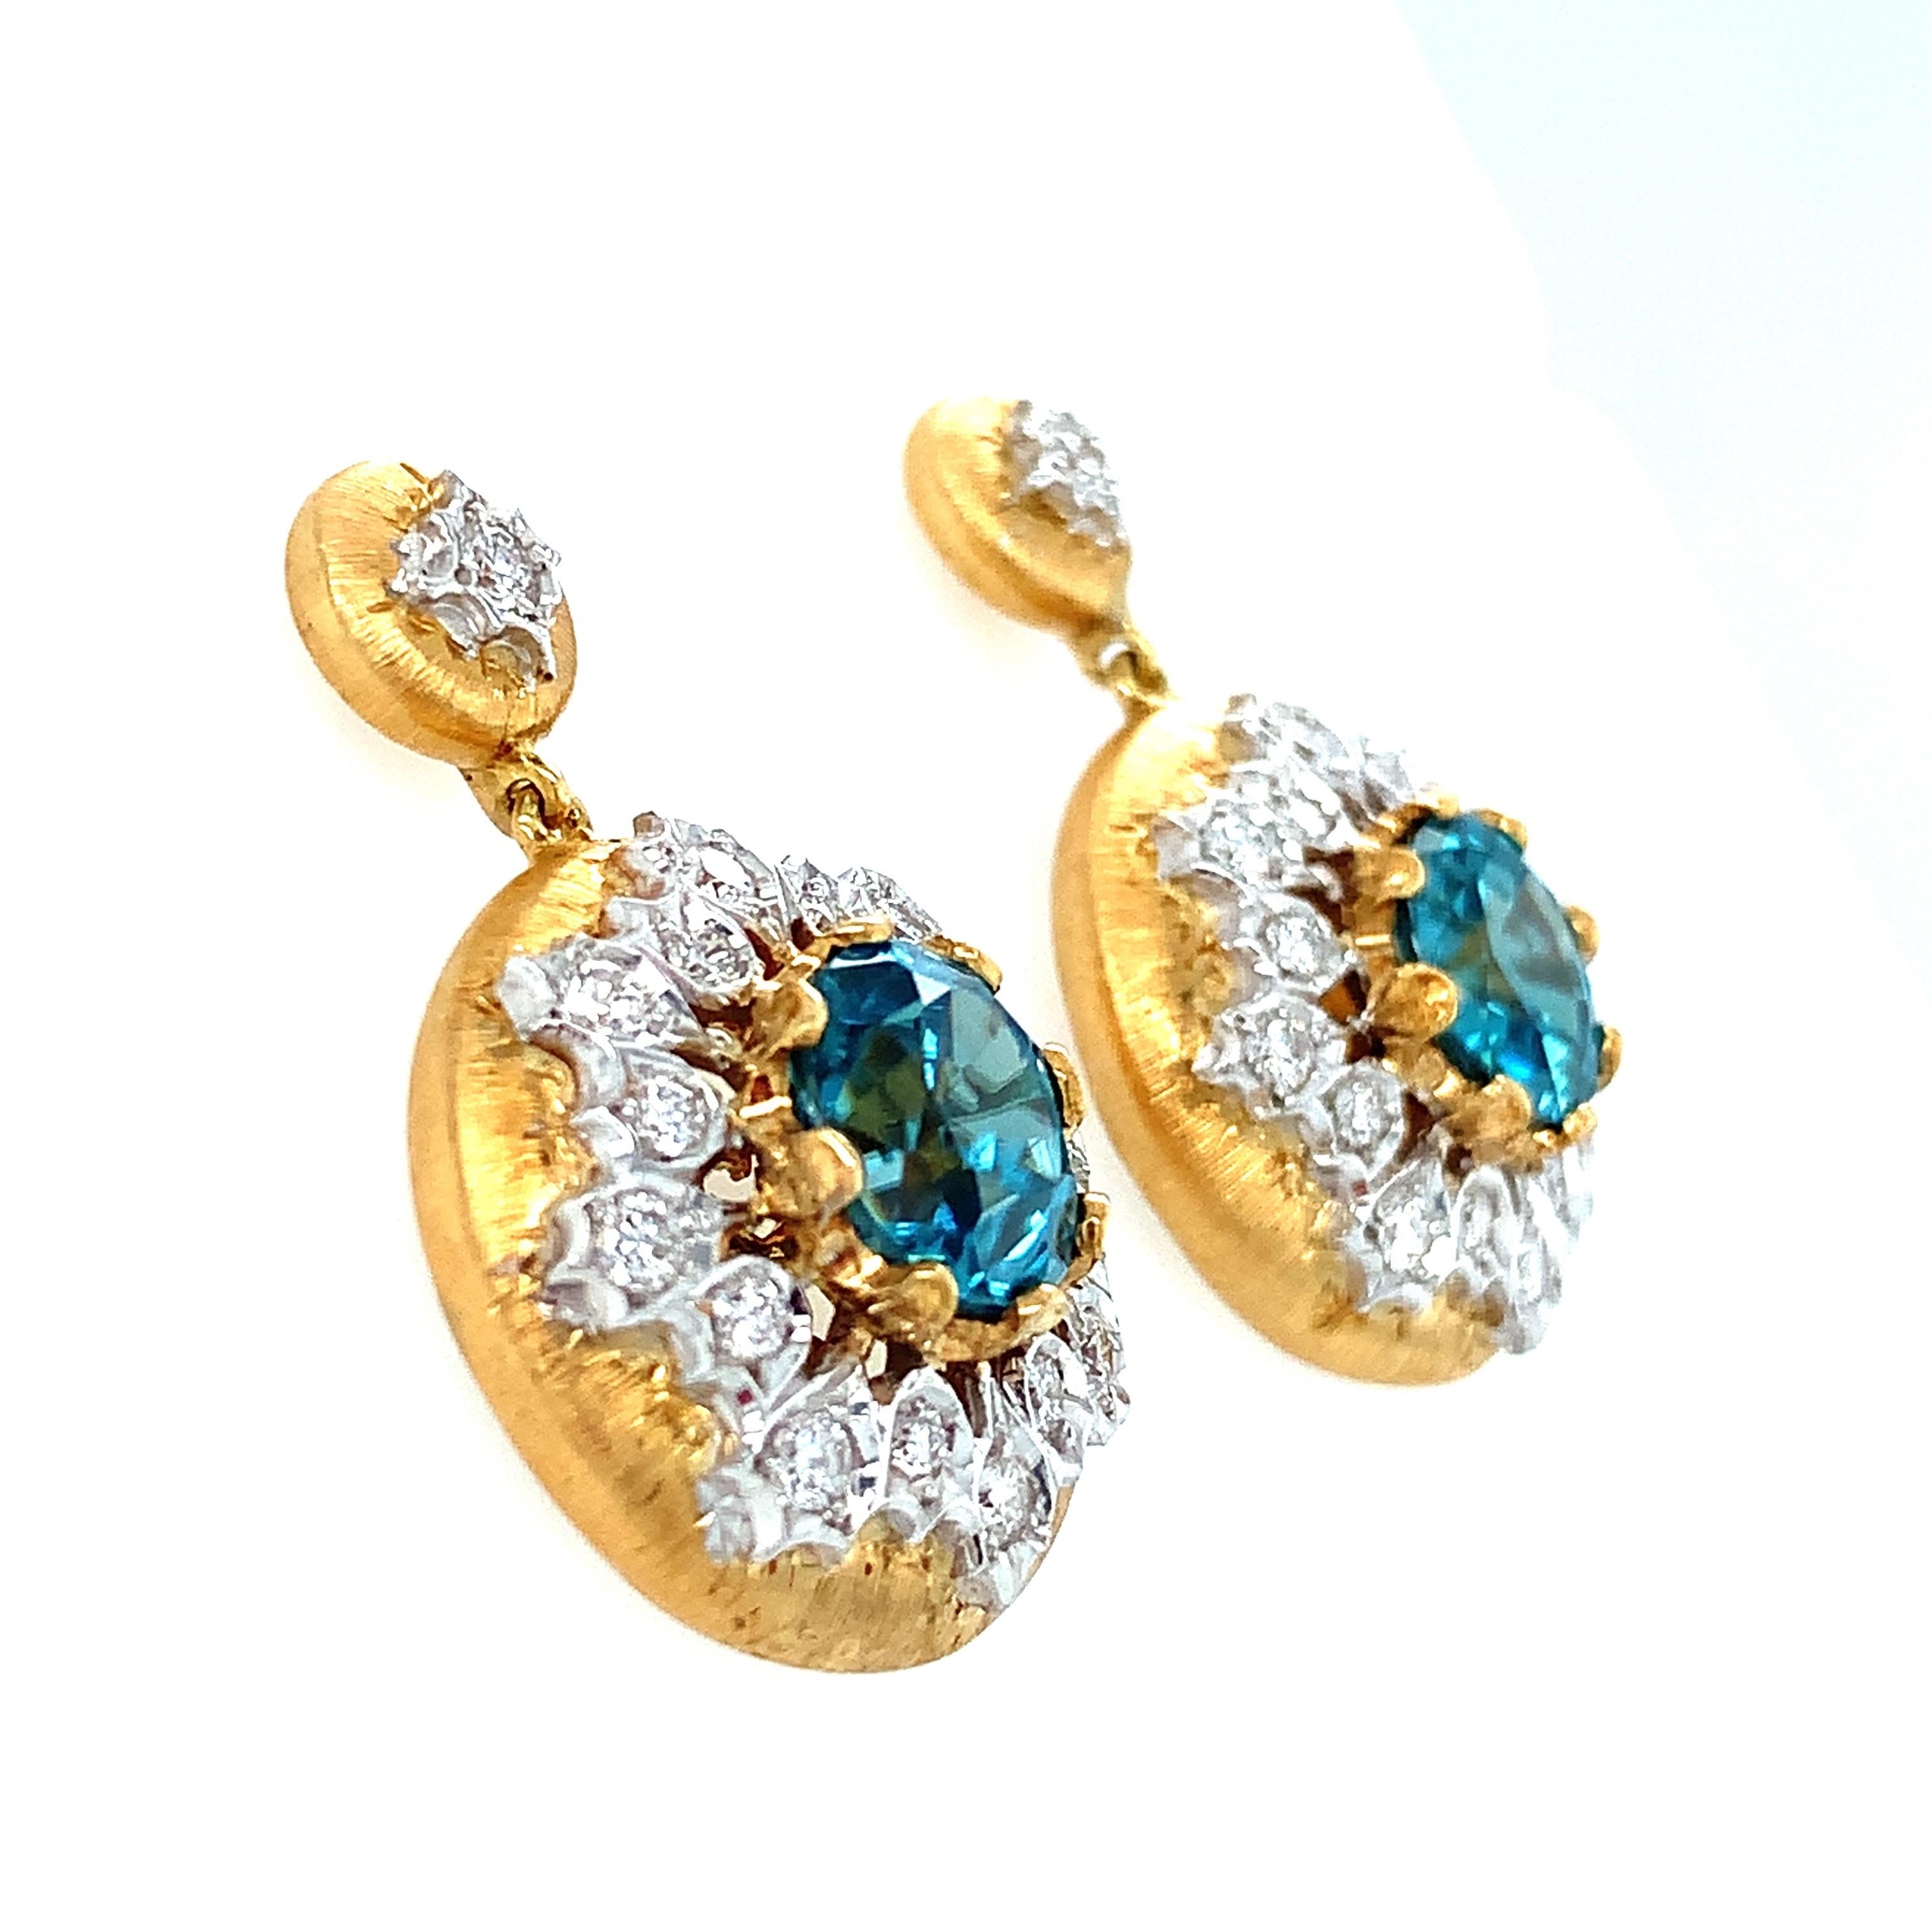 These stunning 18k yellow and white gold drop earrings highlight the natural brilliance of precious blue zircon. Shimmering diamonds radiate from the peacock blue centers, creating exquisite frames that complement the beautiful dispersion enjoyed by